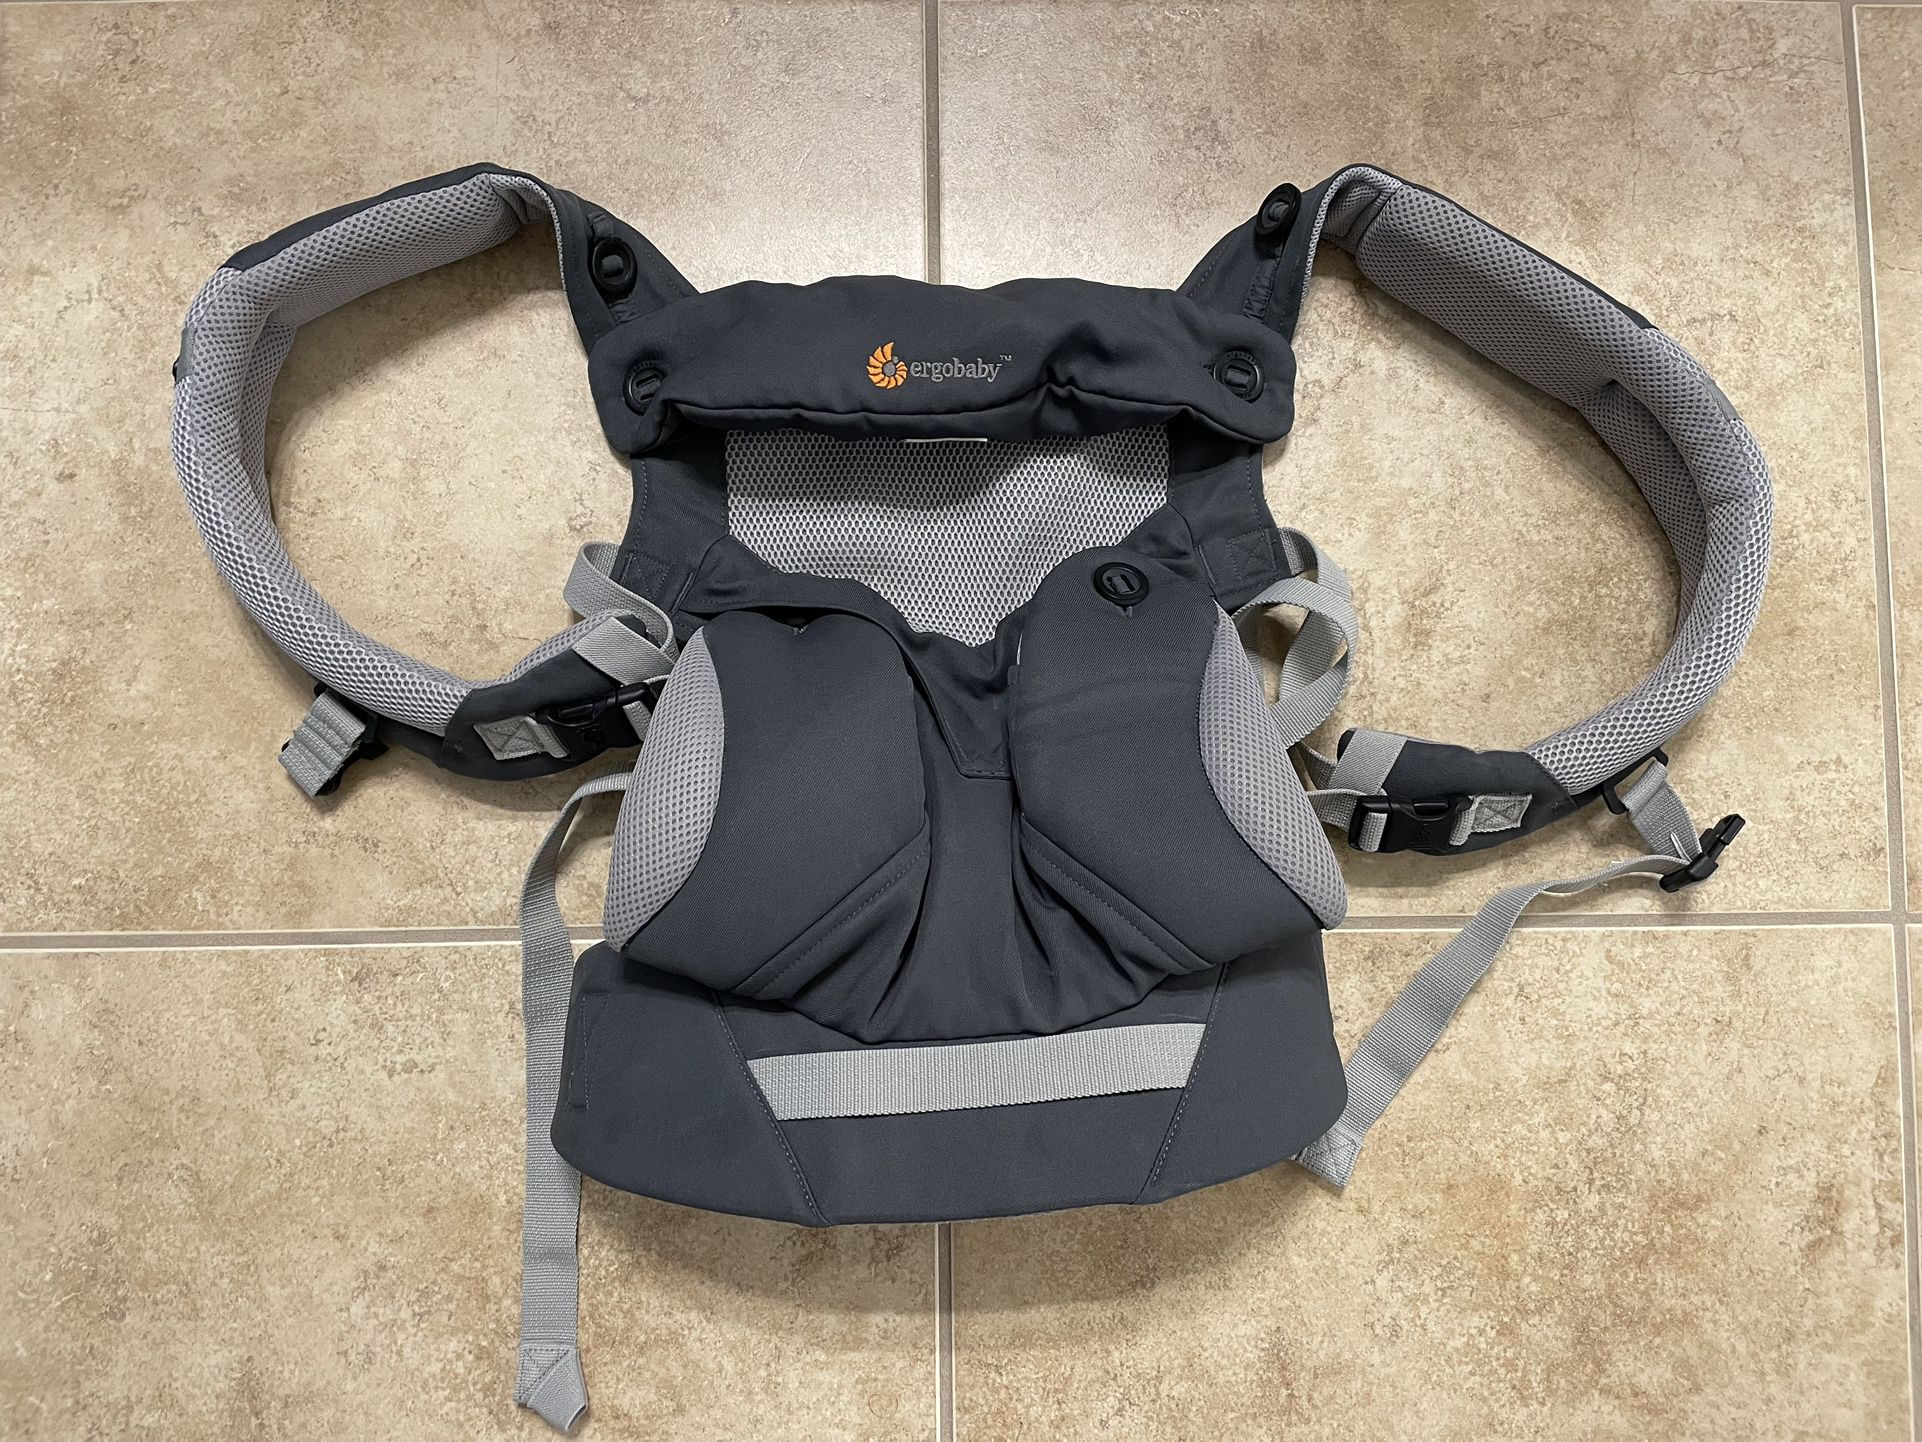 Ergobaby 360 Mesh Baby Carrier with Infant Insert